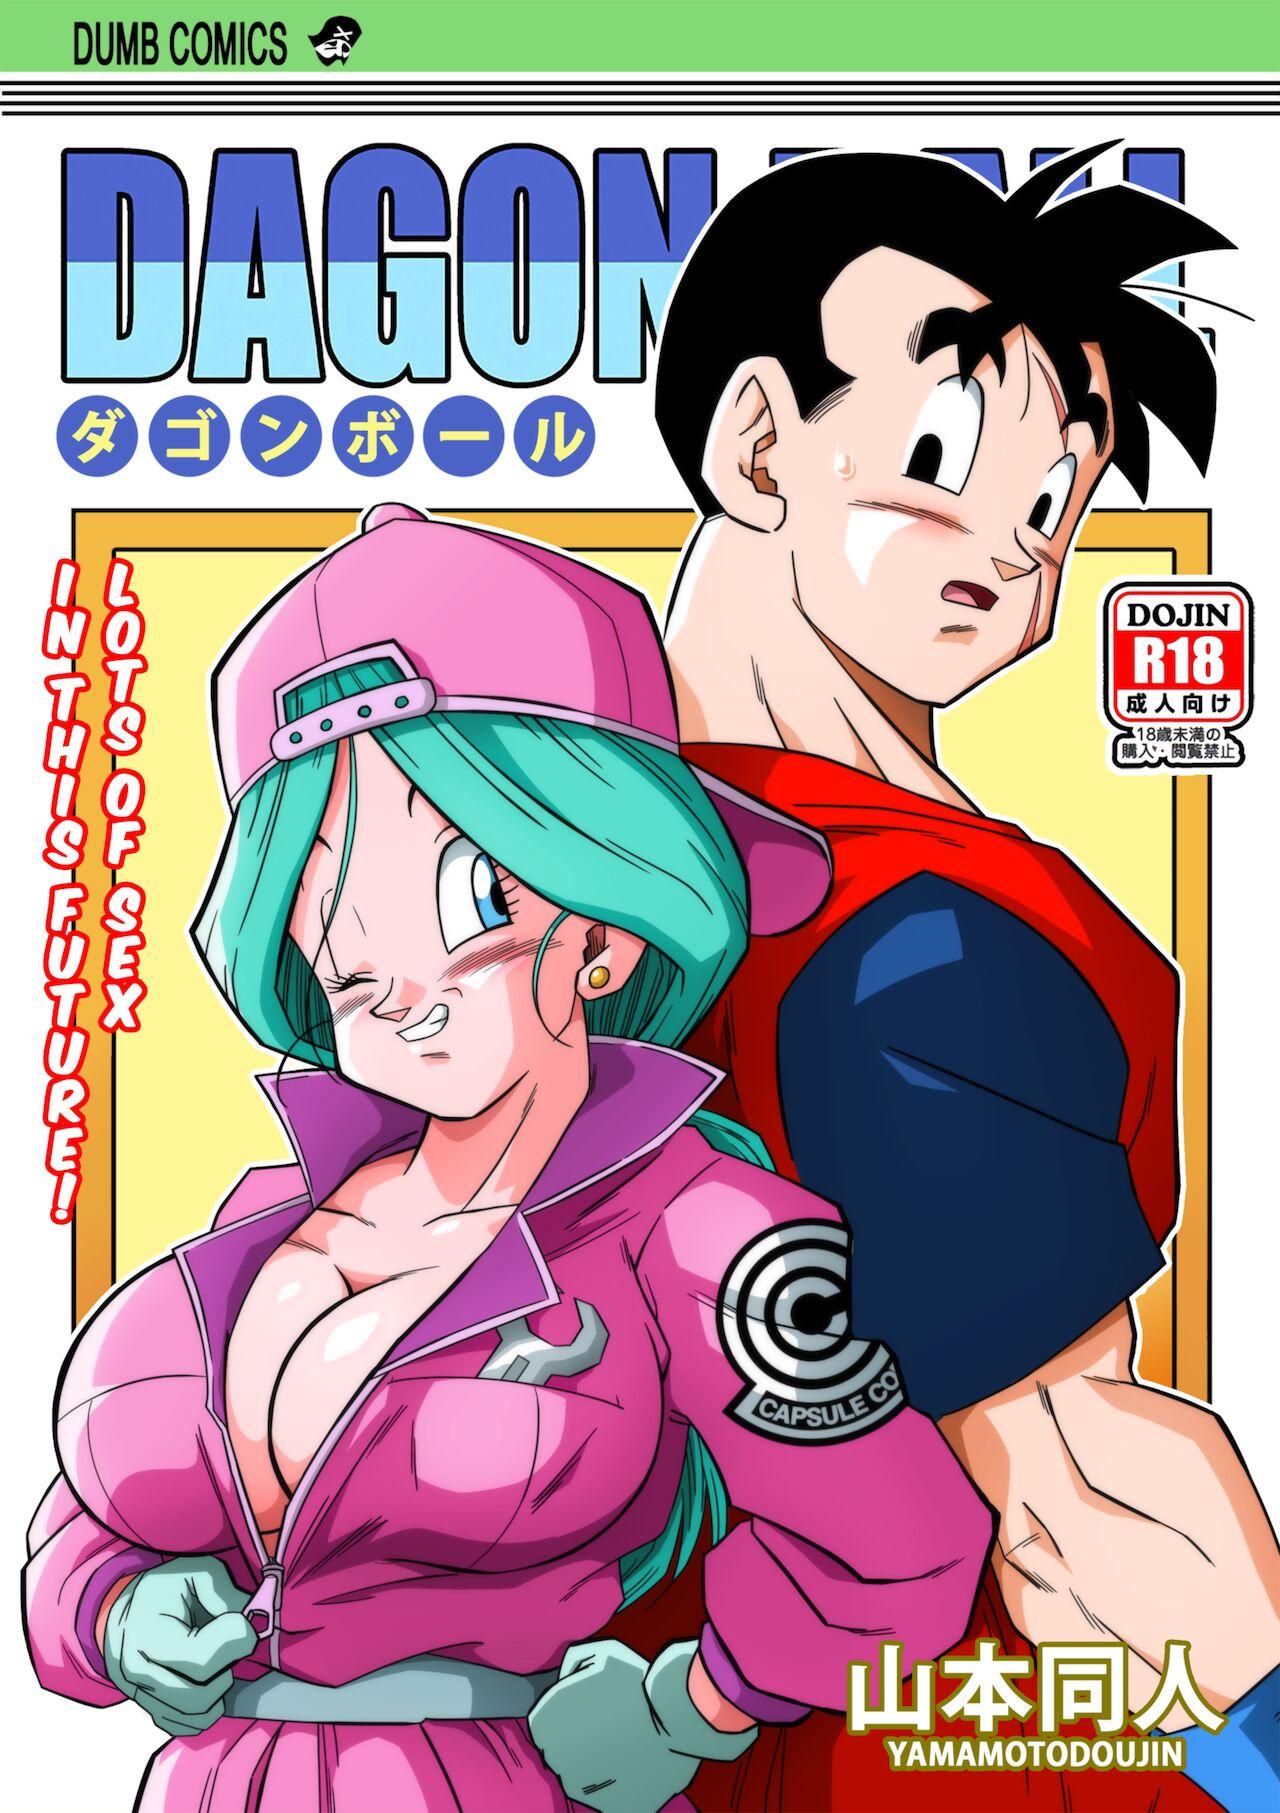 Fat Lots of Sex in this Future!! - Dragon ball z Lovers - Picture 1